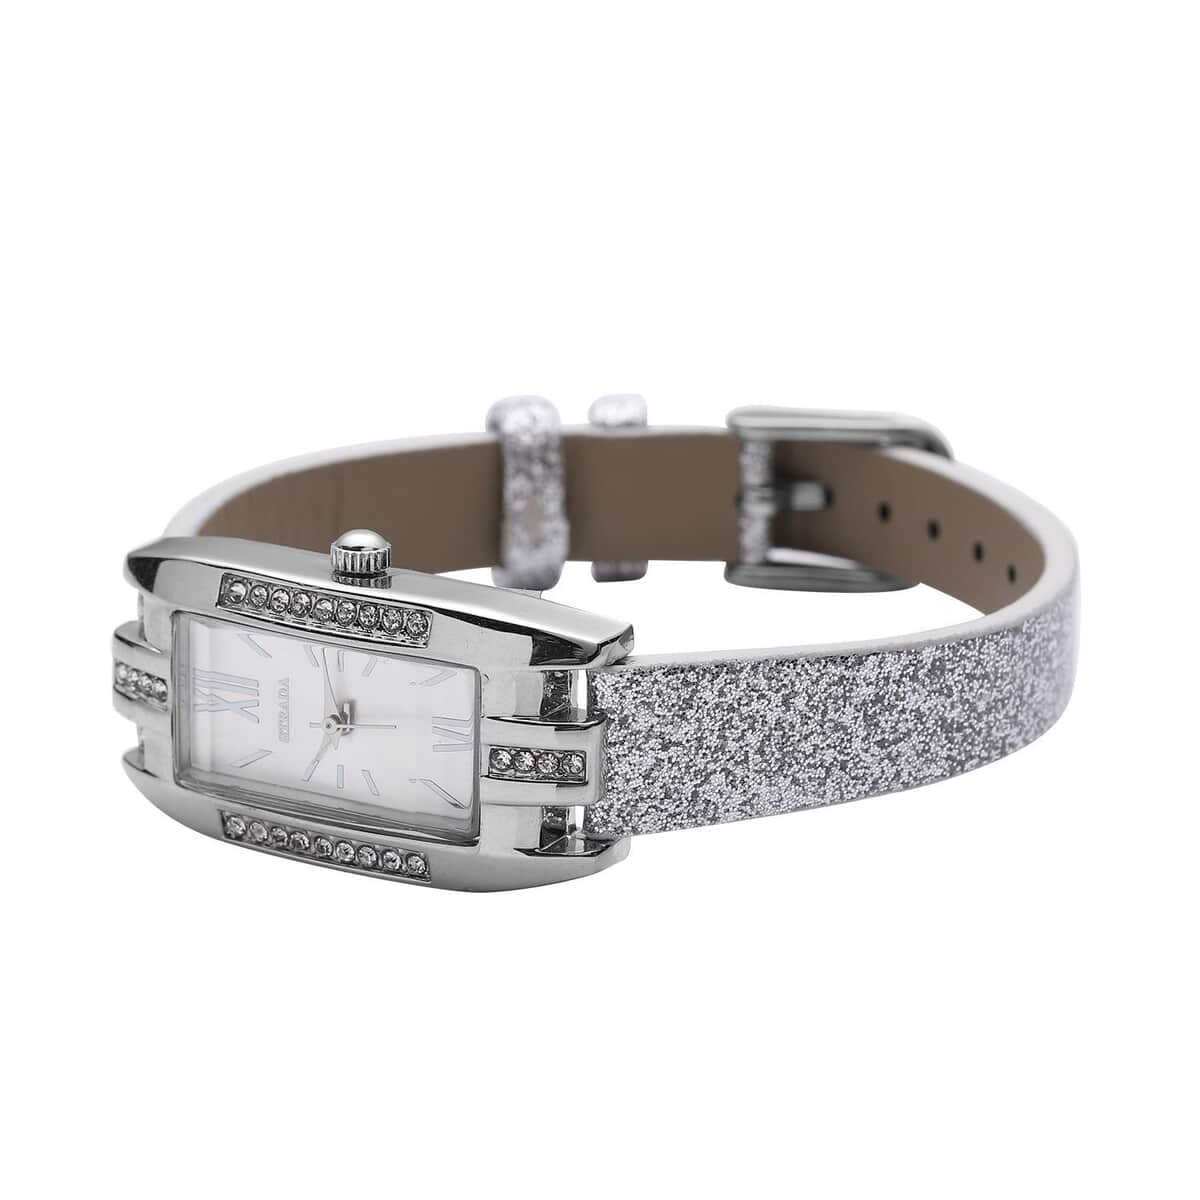 Strada Austrian Crystal Japanese Movement Rectangular Dial Watch with Silver Stardust Faux Leather Strap (37.84x20.30mm) (5.50-7.70 Inches) image number 4